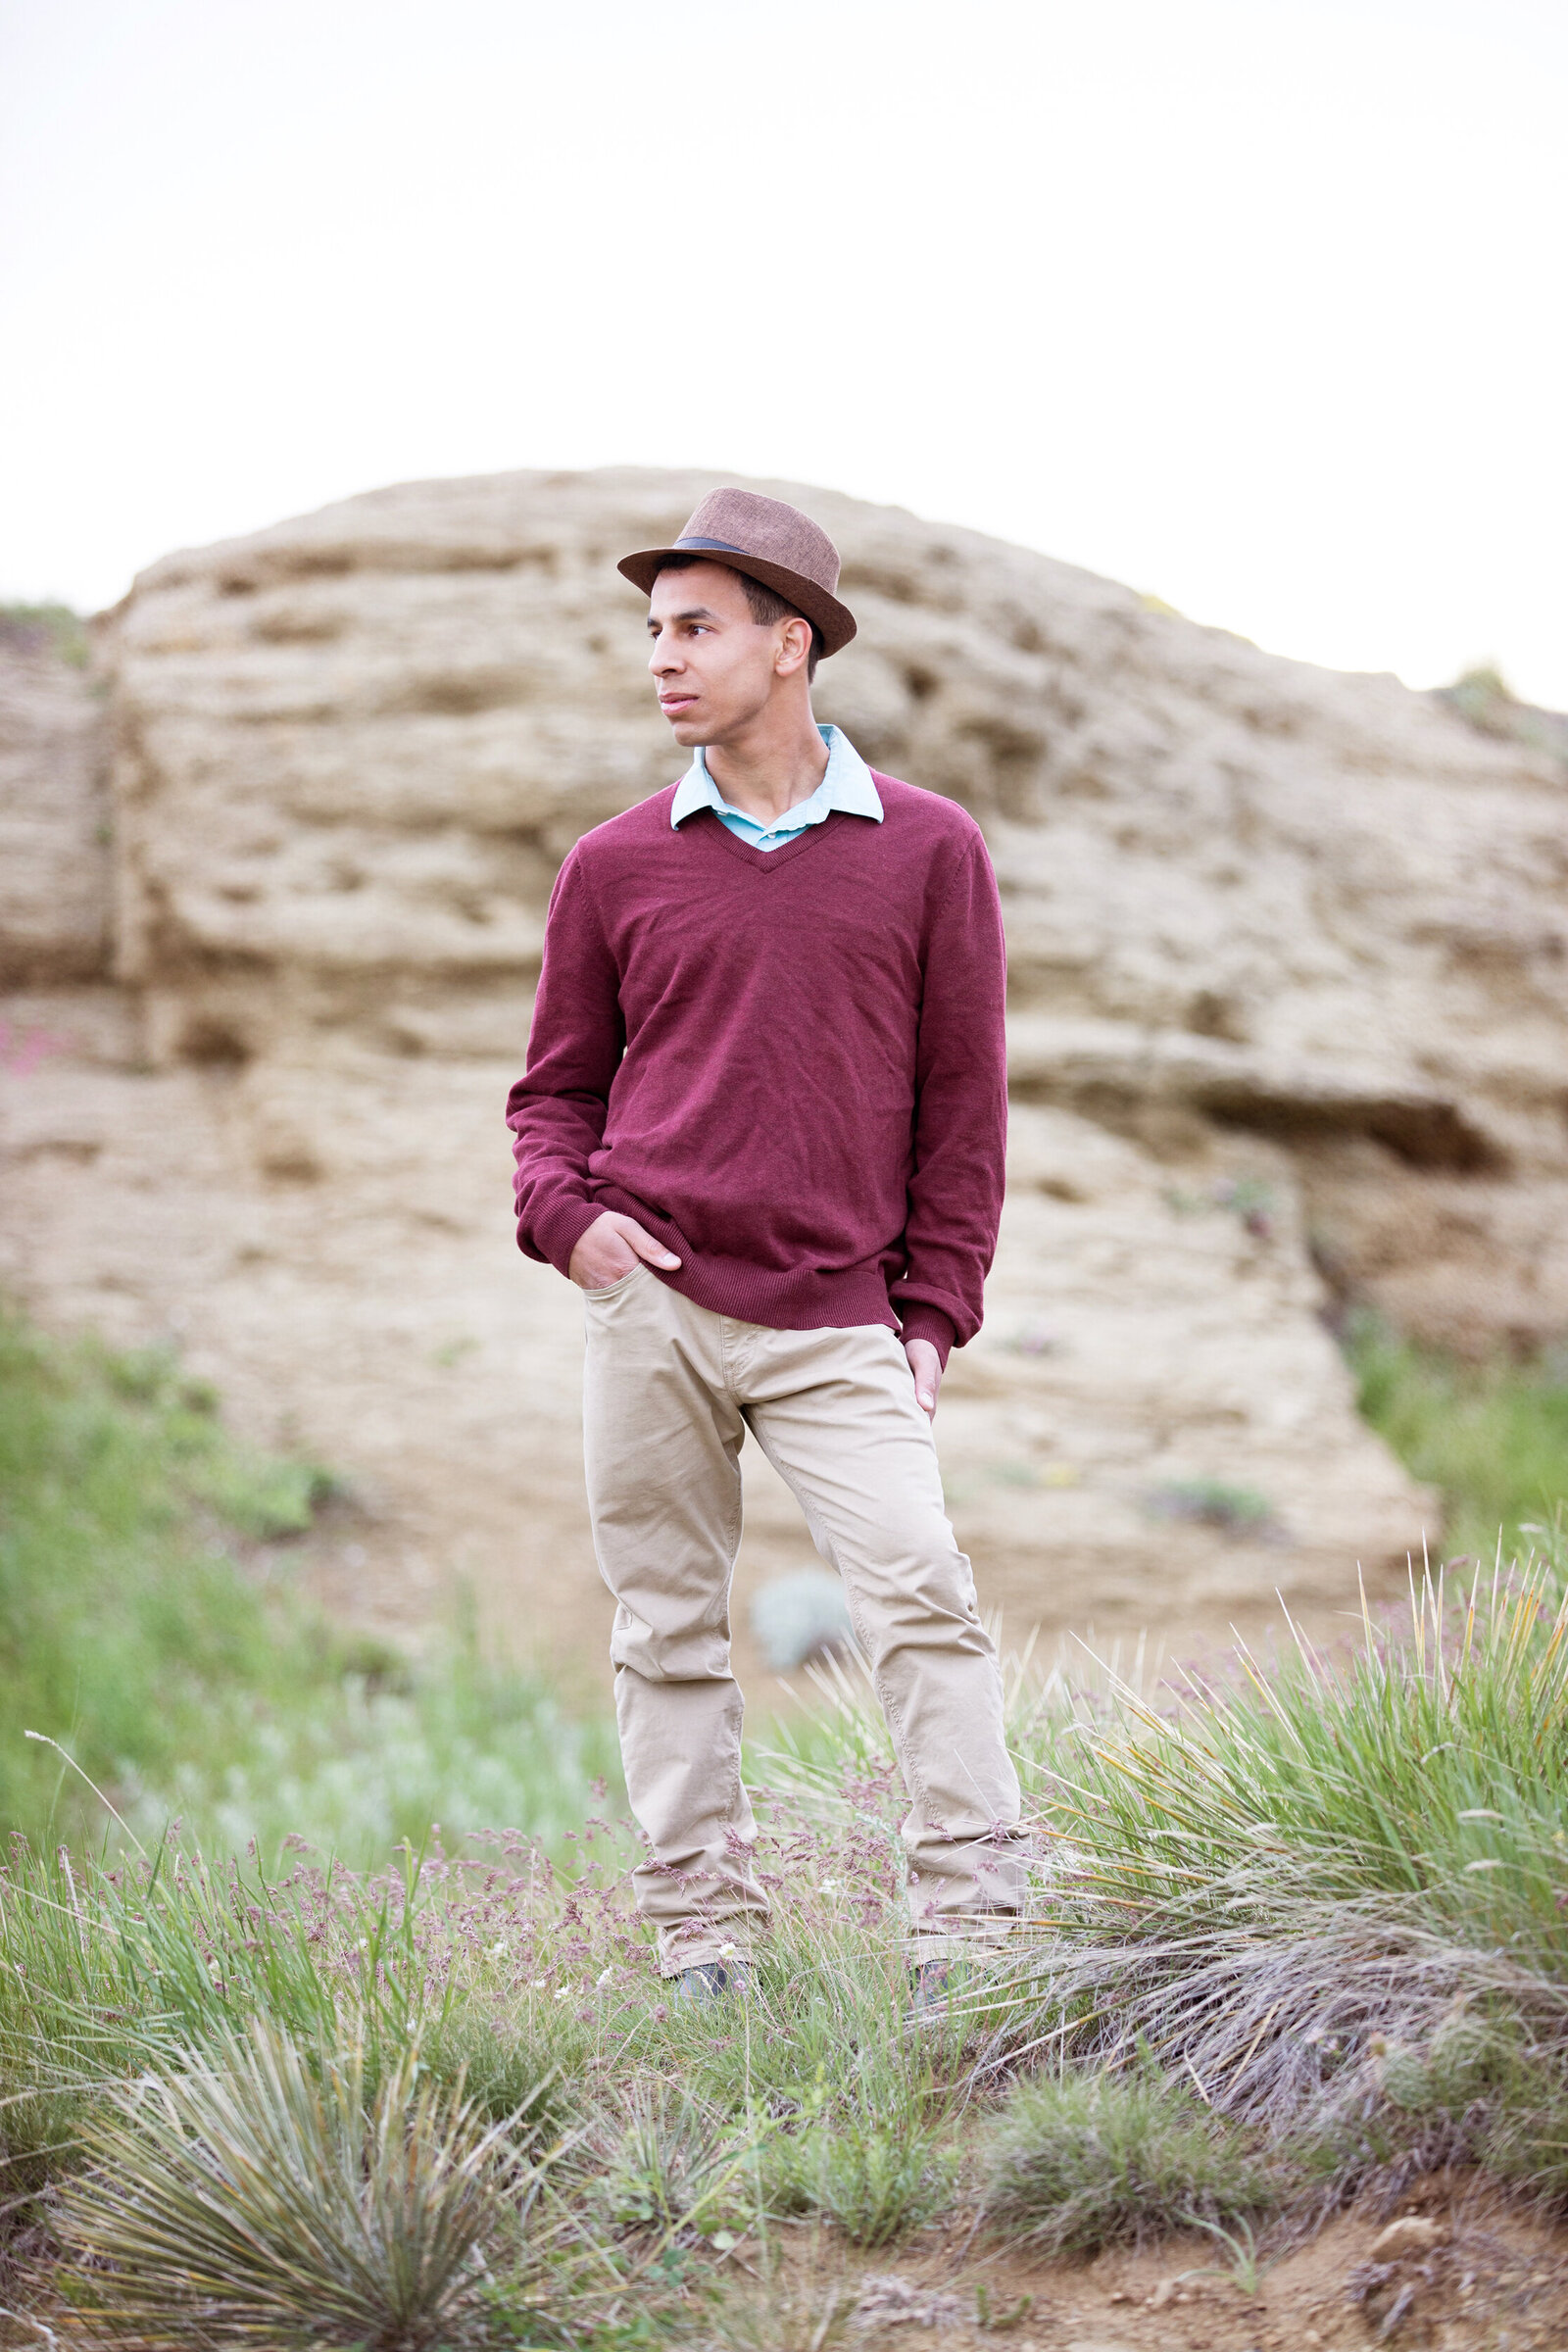 Picture of  high school senior wearing red and tan and a hat. Yucca plants in the foreground and sandstone in the background at Swords Park near the airport in Billings MT.